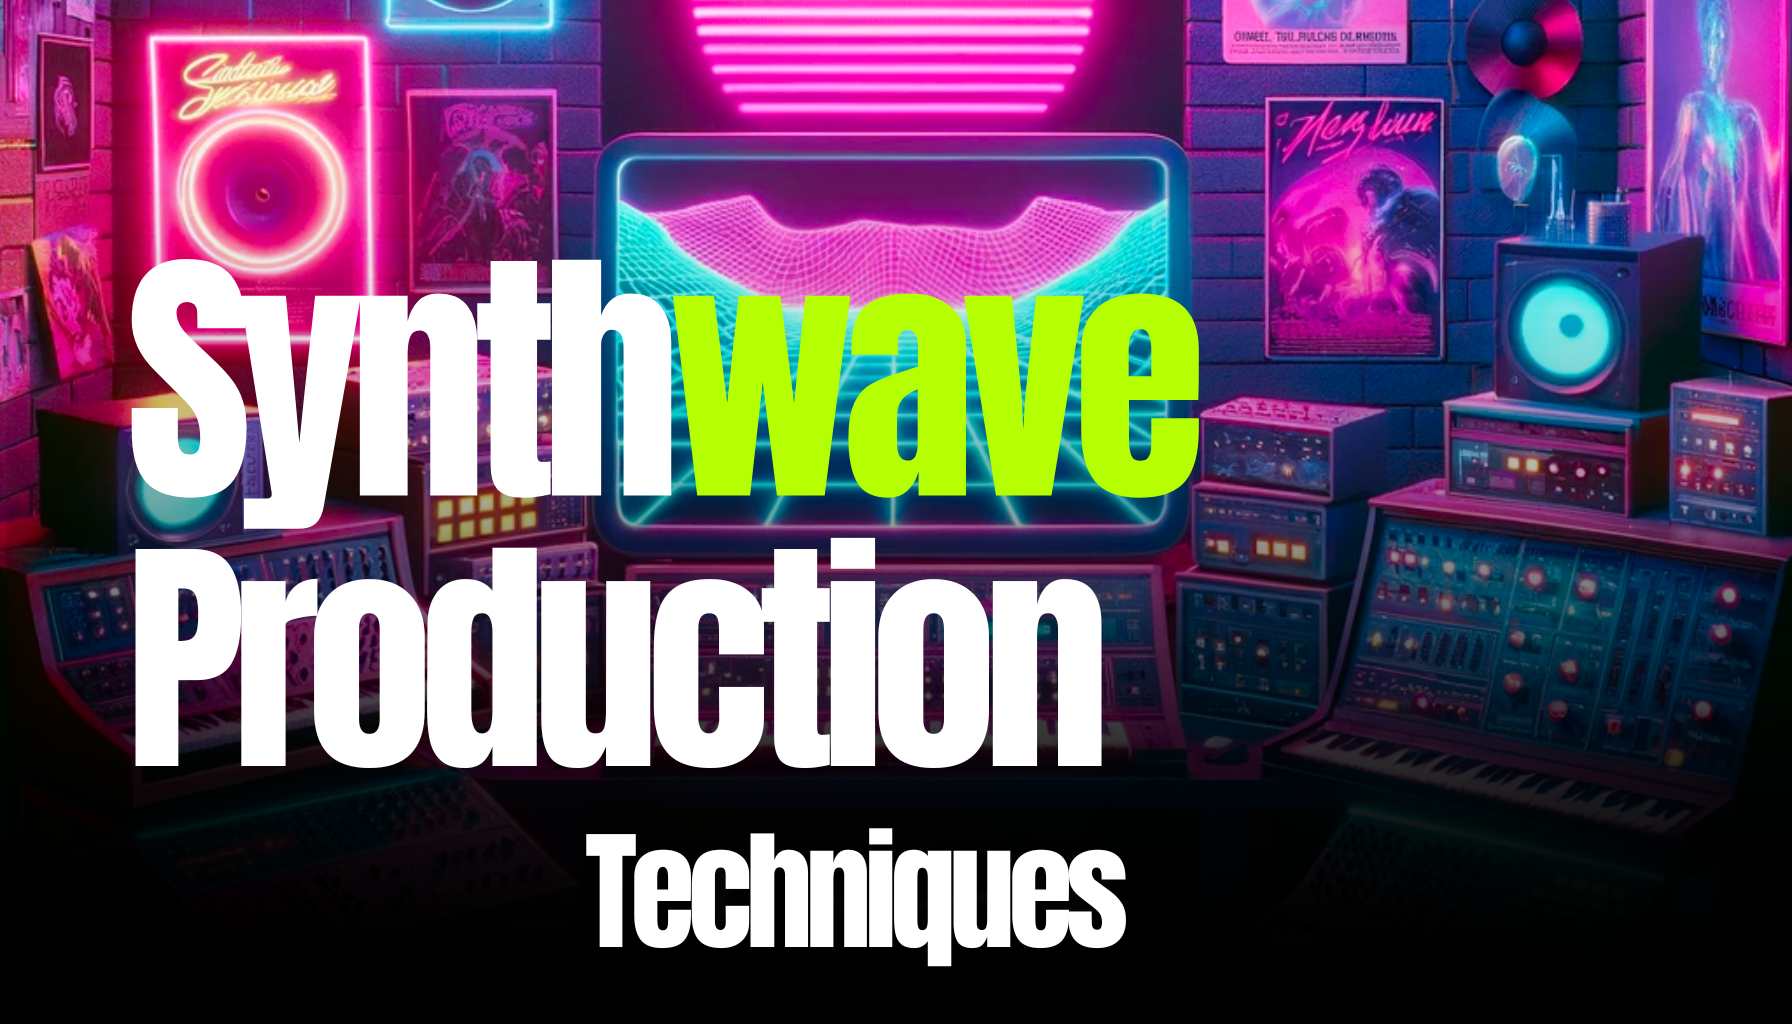 a retro style image of a room featuring Synthwave Production Techniques, equipment, and audio gear